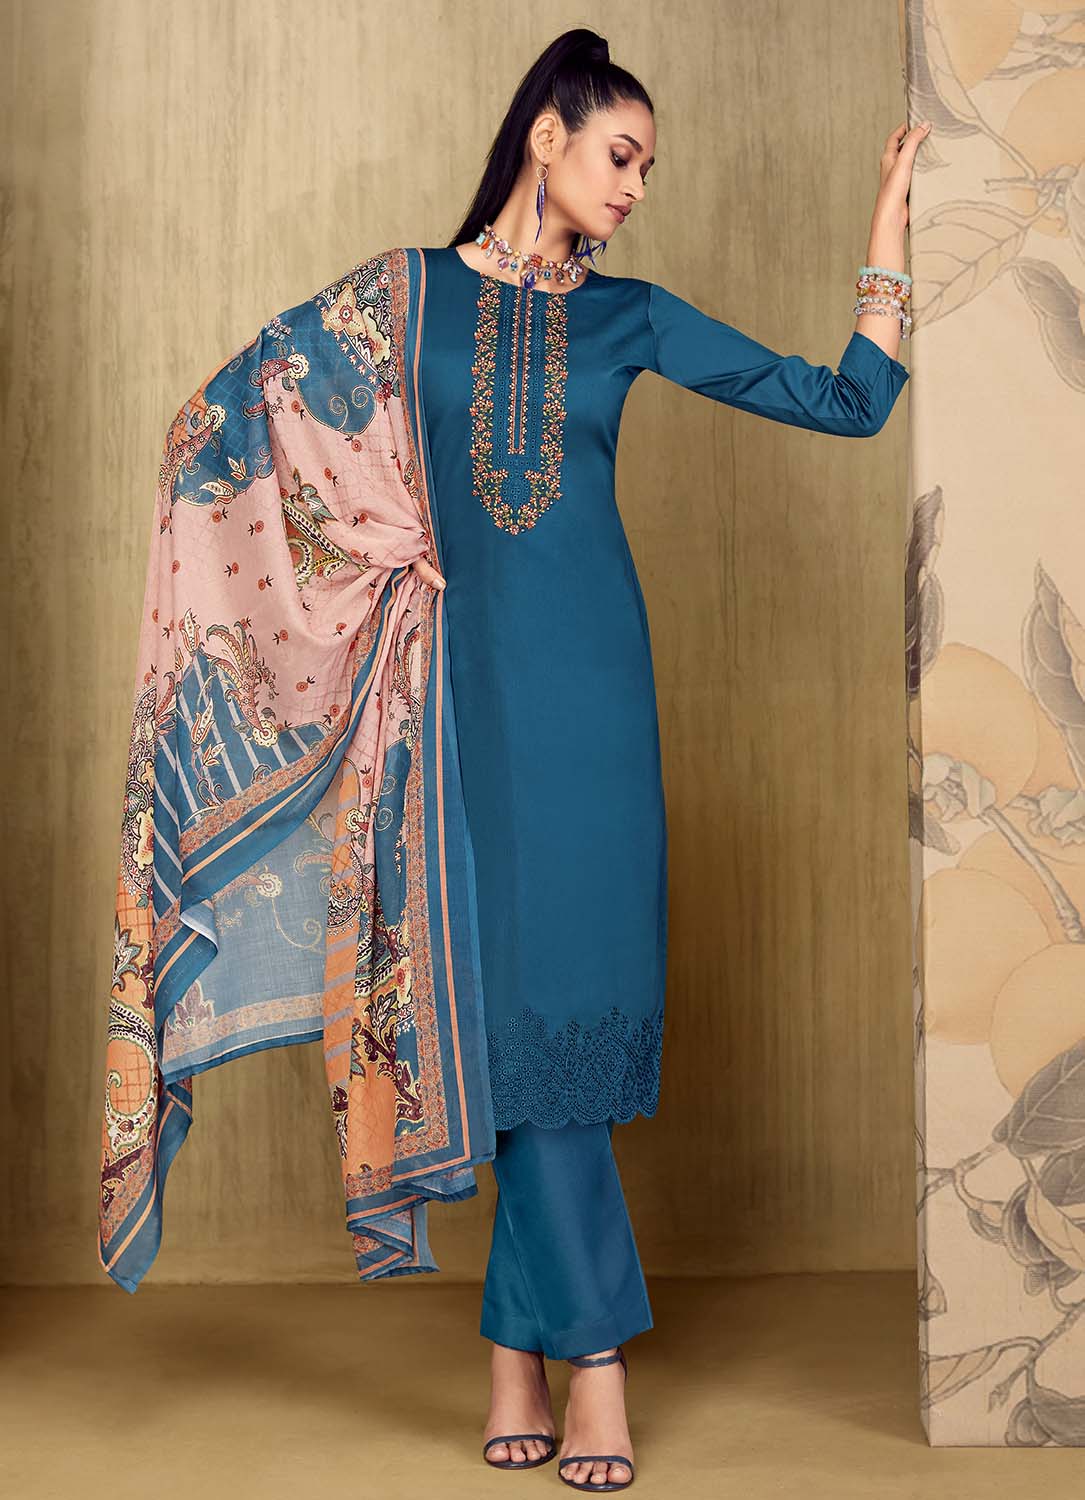 Belliza Unstitched Blue Cotton Suit Dress Material with Embroidery